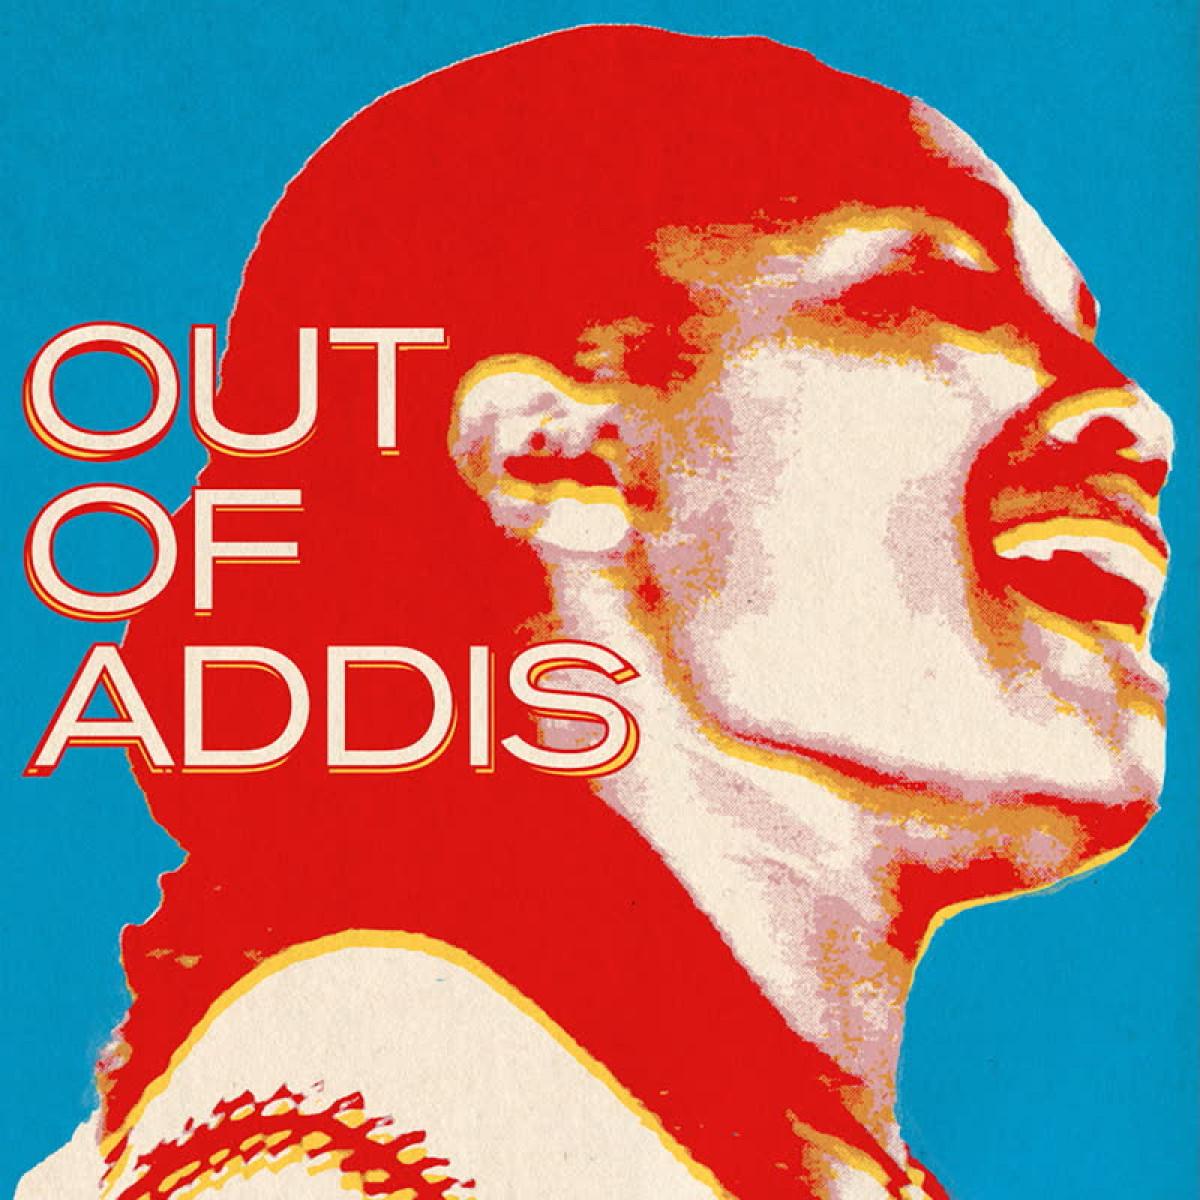 VARIOUS ARTISTS - Out od Addis